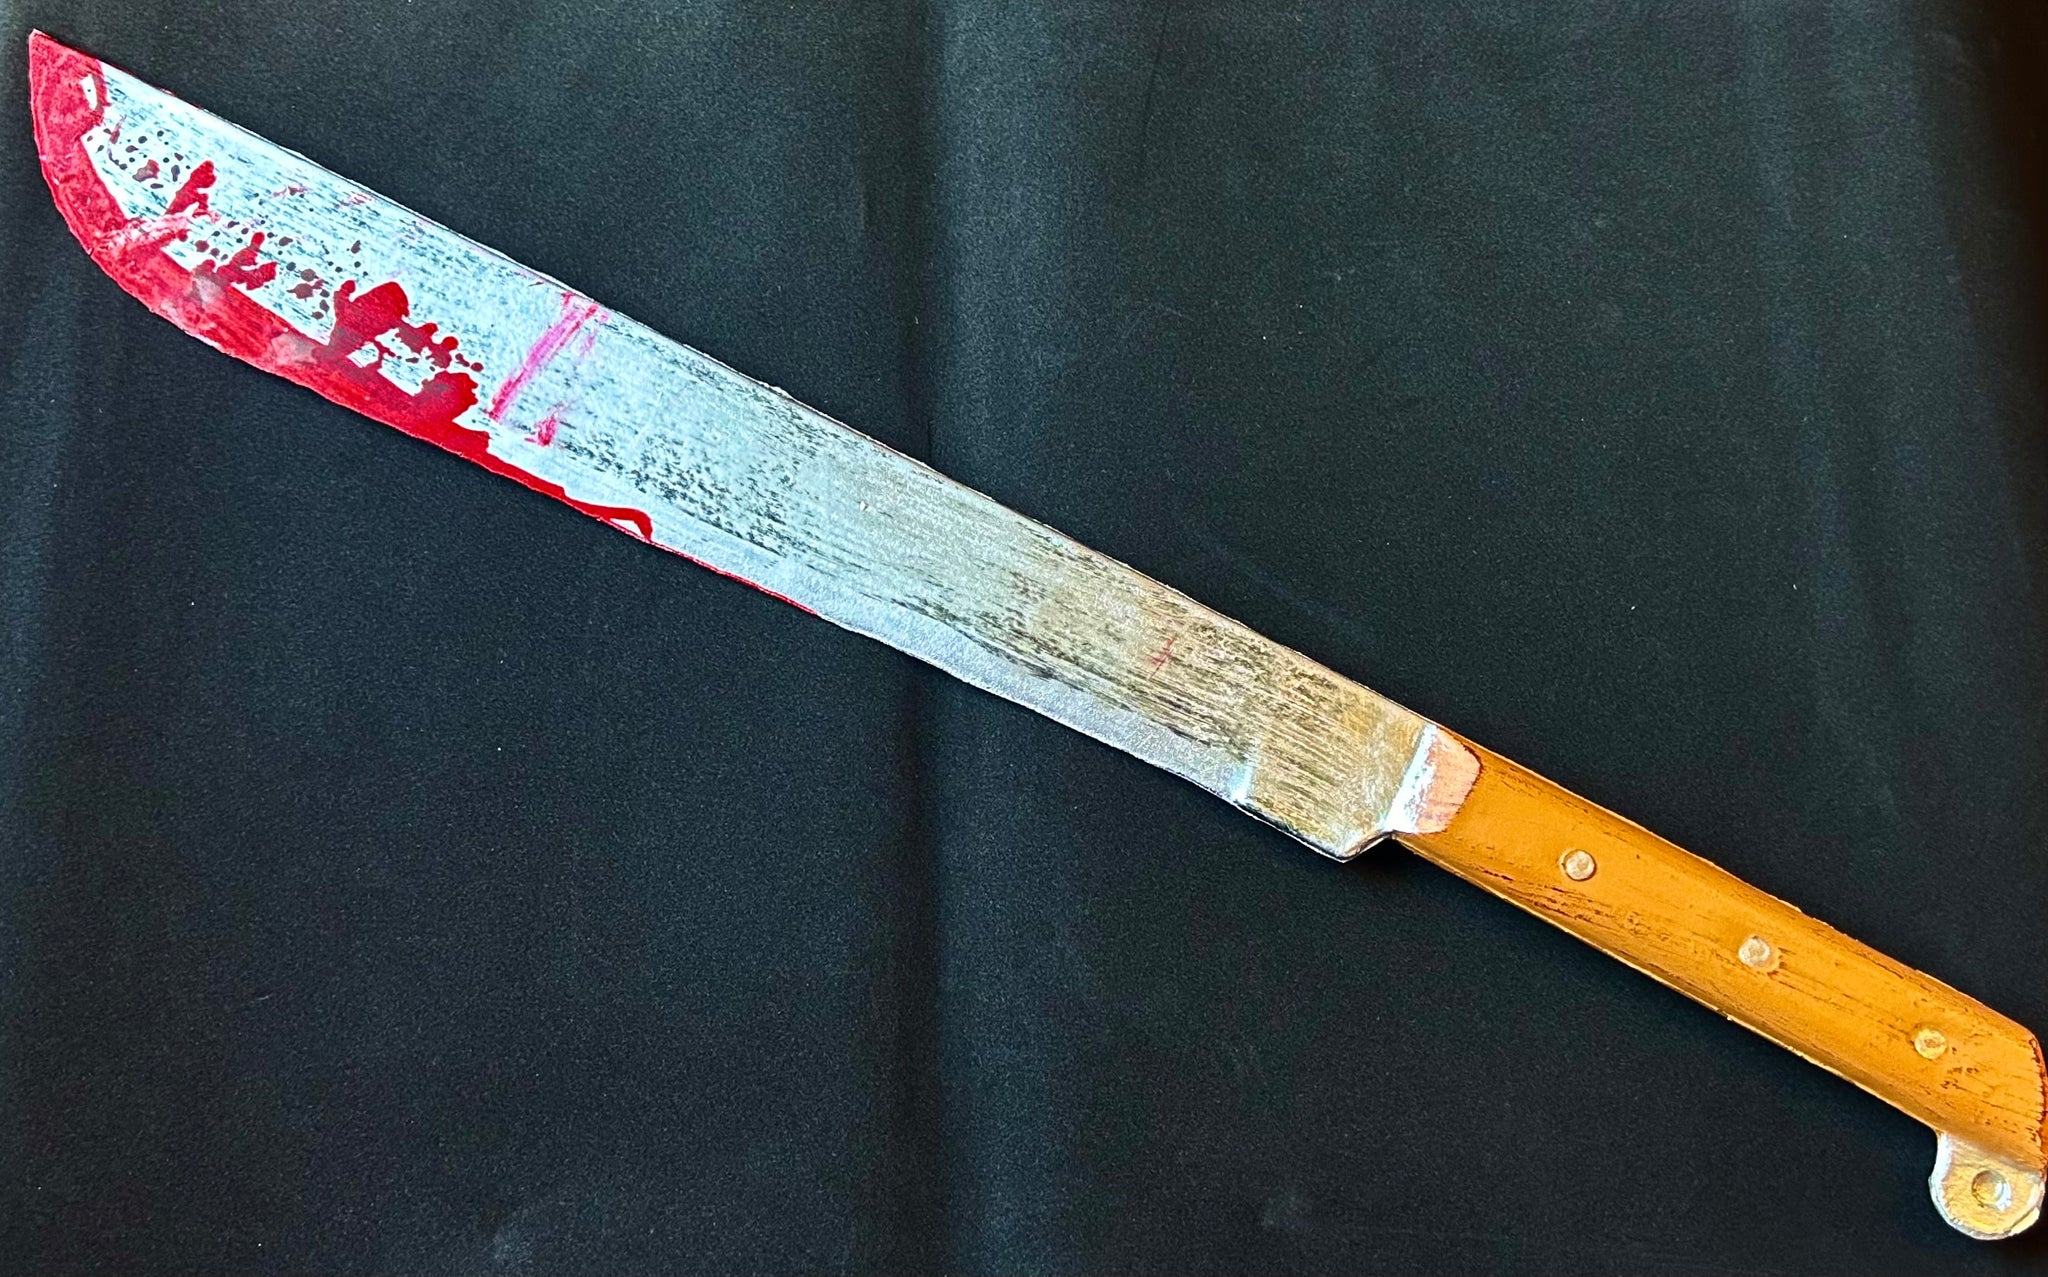 Friday the 13th Ari Lehman Autographed Replica Machete with Triple Layer Authenticity